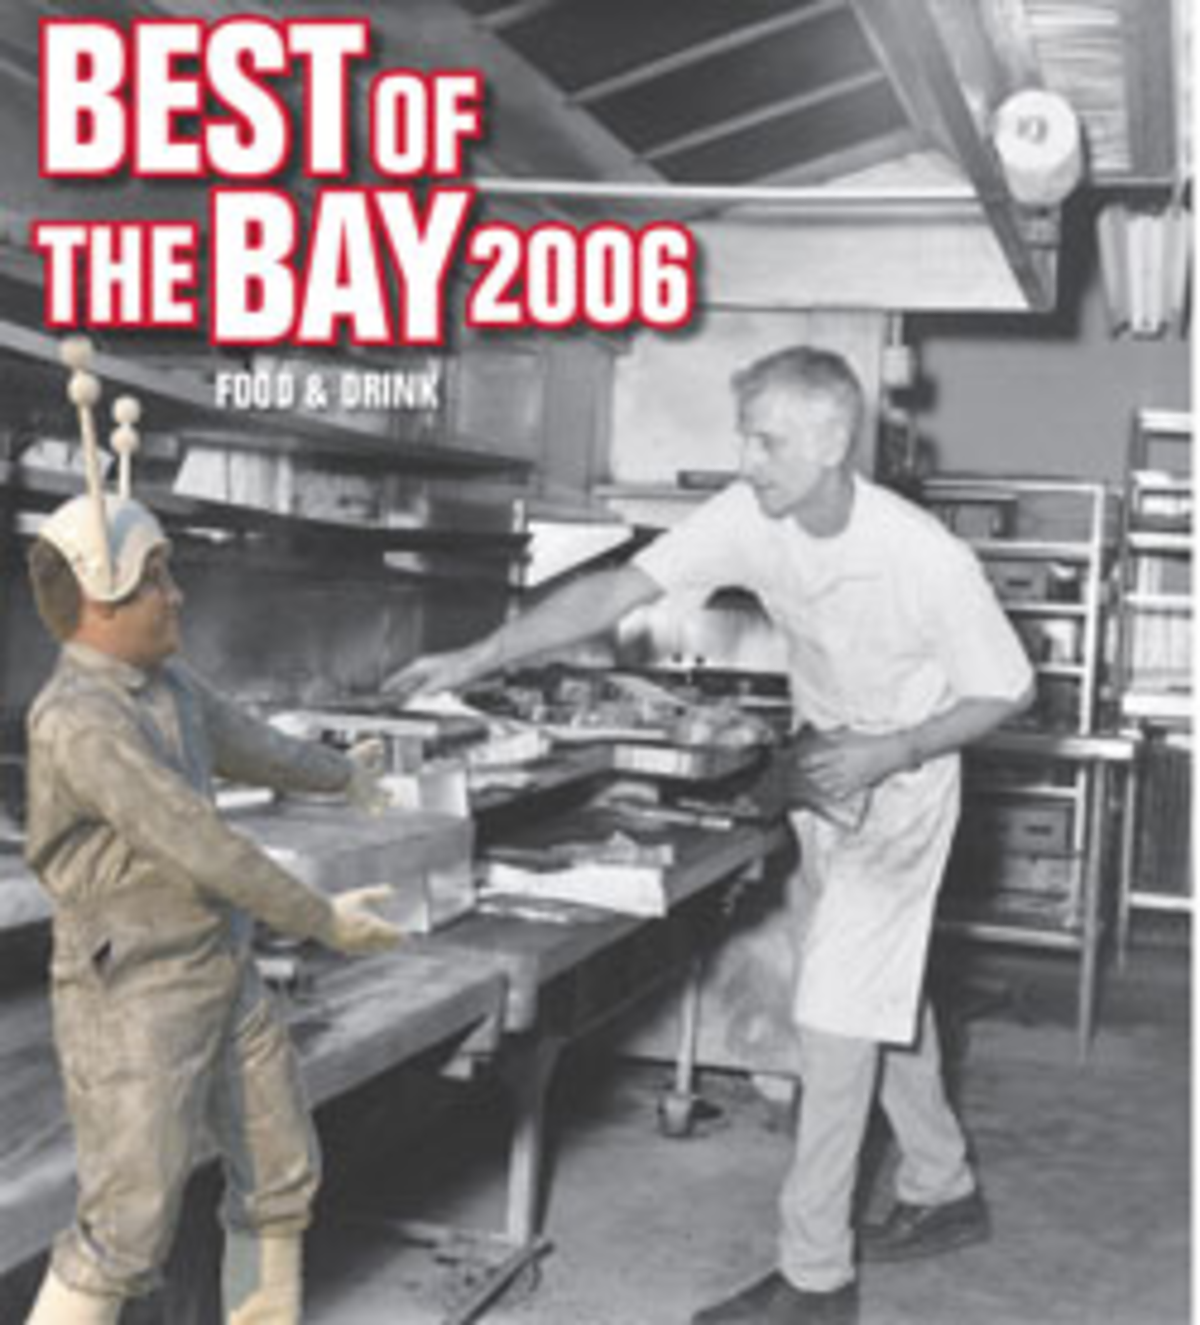 Bern Laxer tends to his steaks in the early years of BERNS STEAK HOUSE, where CL3000 shared tips from the 22nd century on how to grill the perfect porterhouse. (Photo courtesy Berns Steak House)